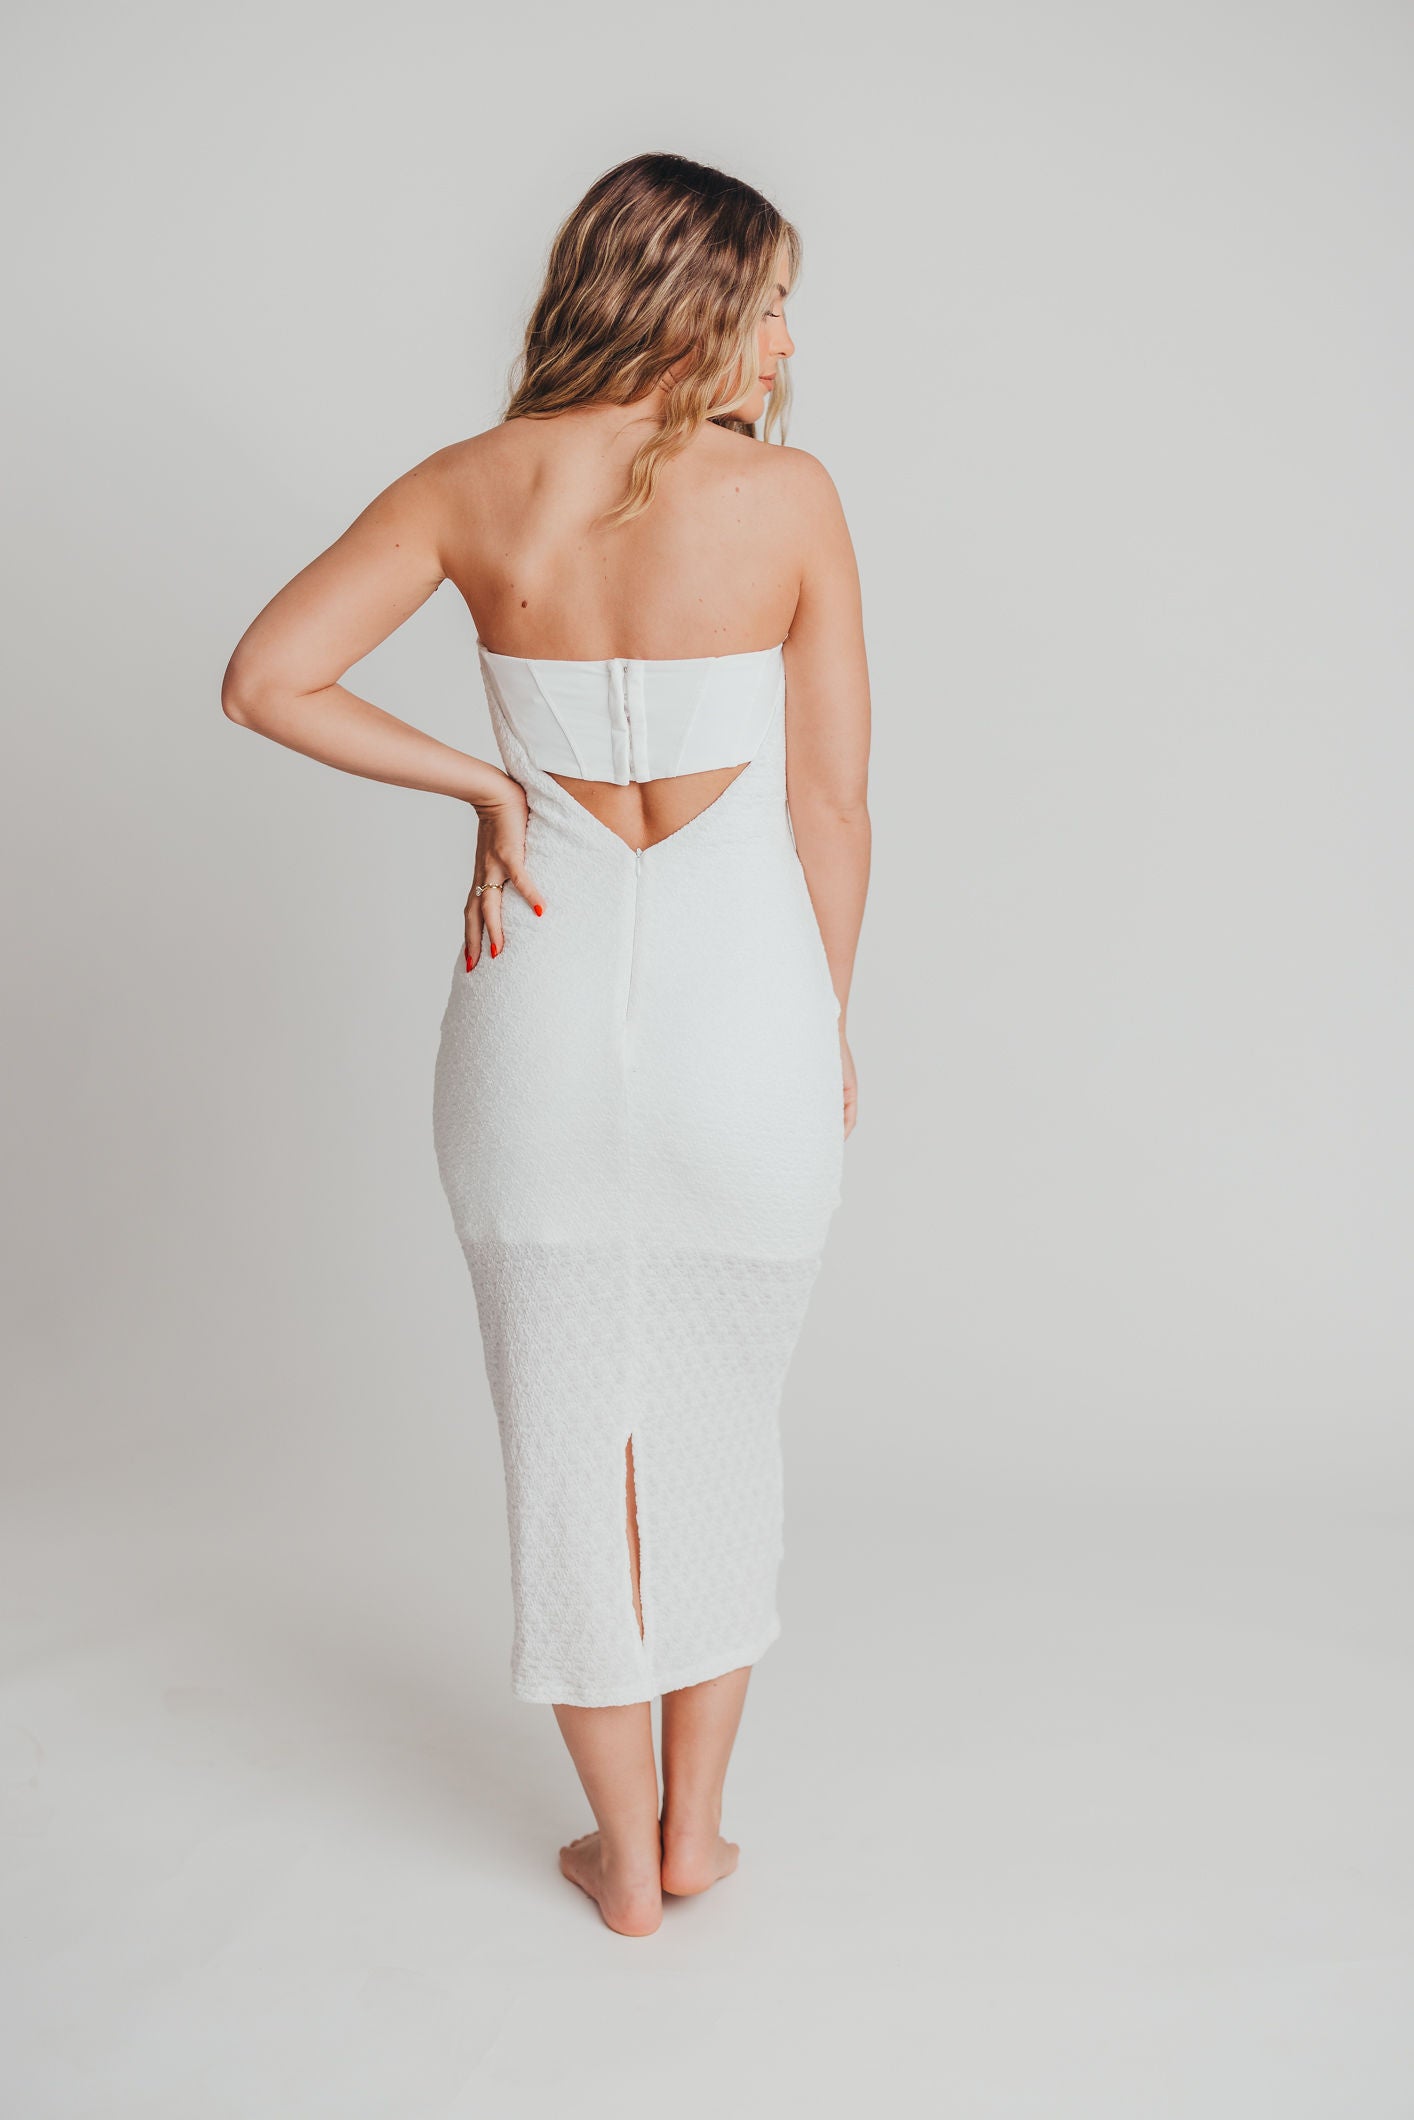 Jasmine Tube Dress with Corset Back in White